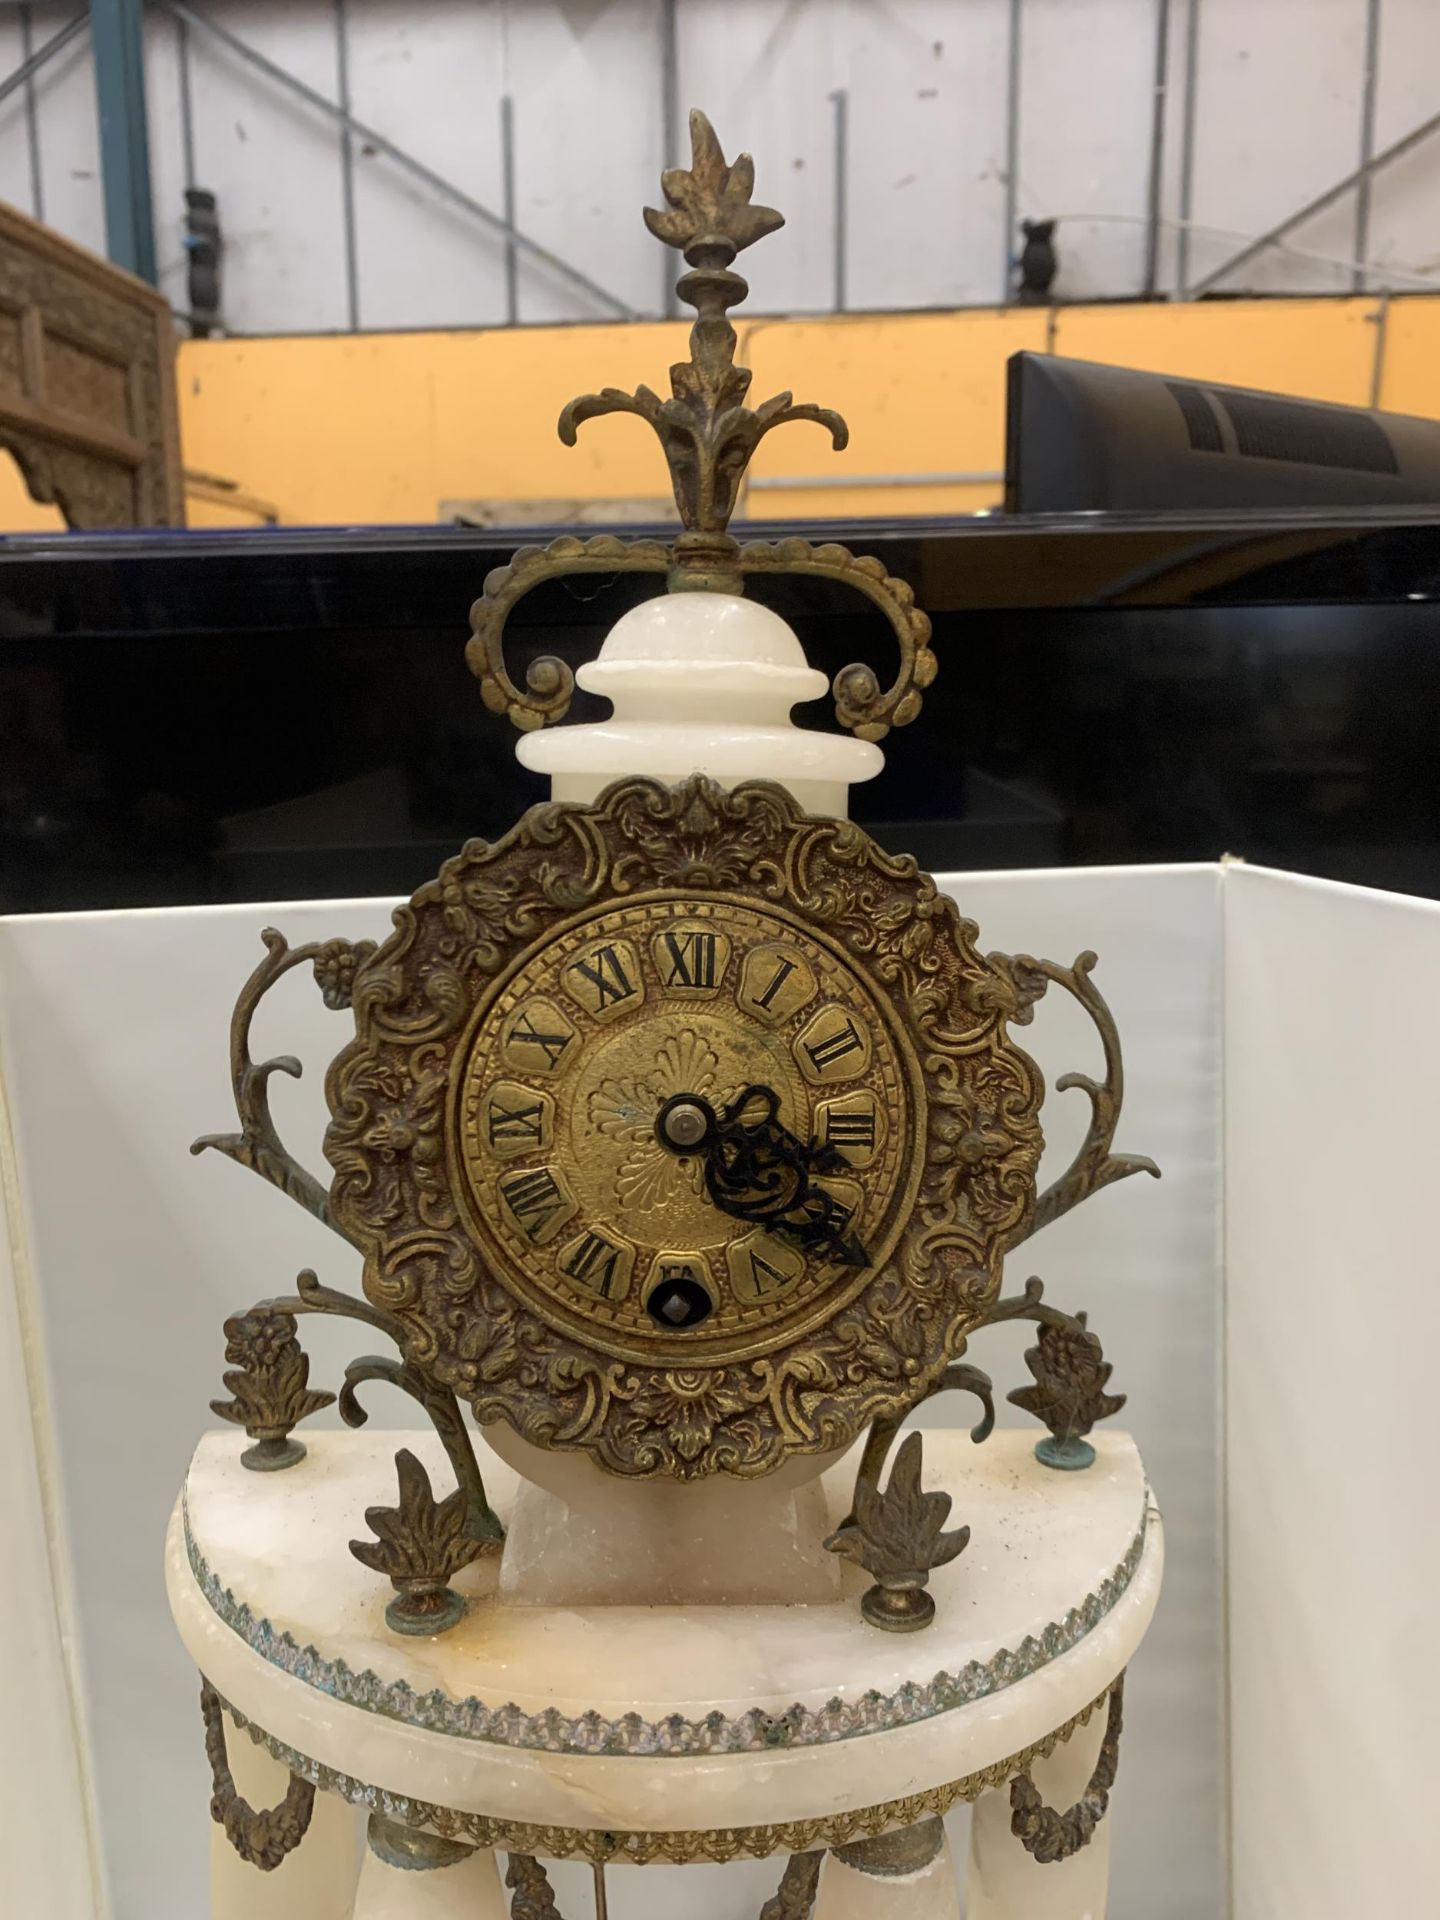 A PORTICO CLOCK LOUIS XVI STYLE IN WHITE MARBLE WITH GILDED BRONZE. A HALF MOON SHAPED PORTICO - Bild 3 aus 5